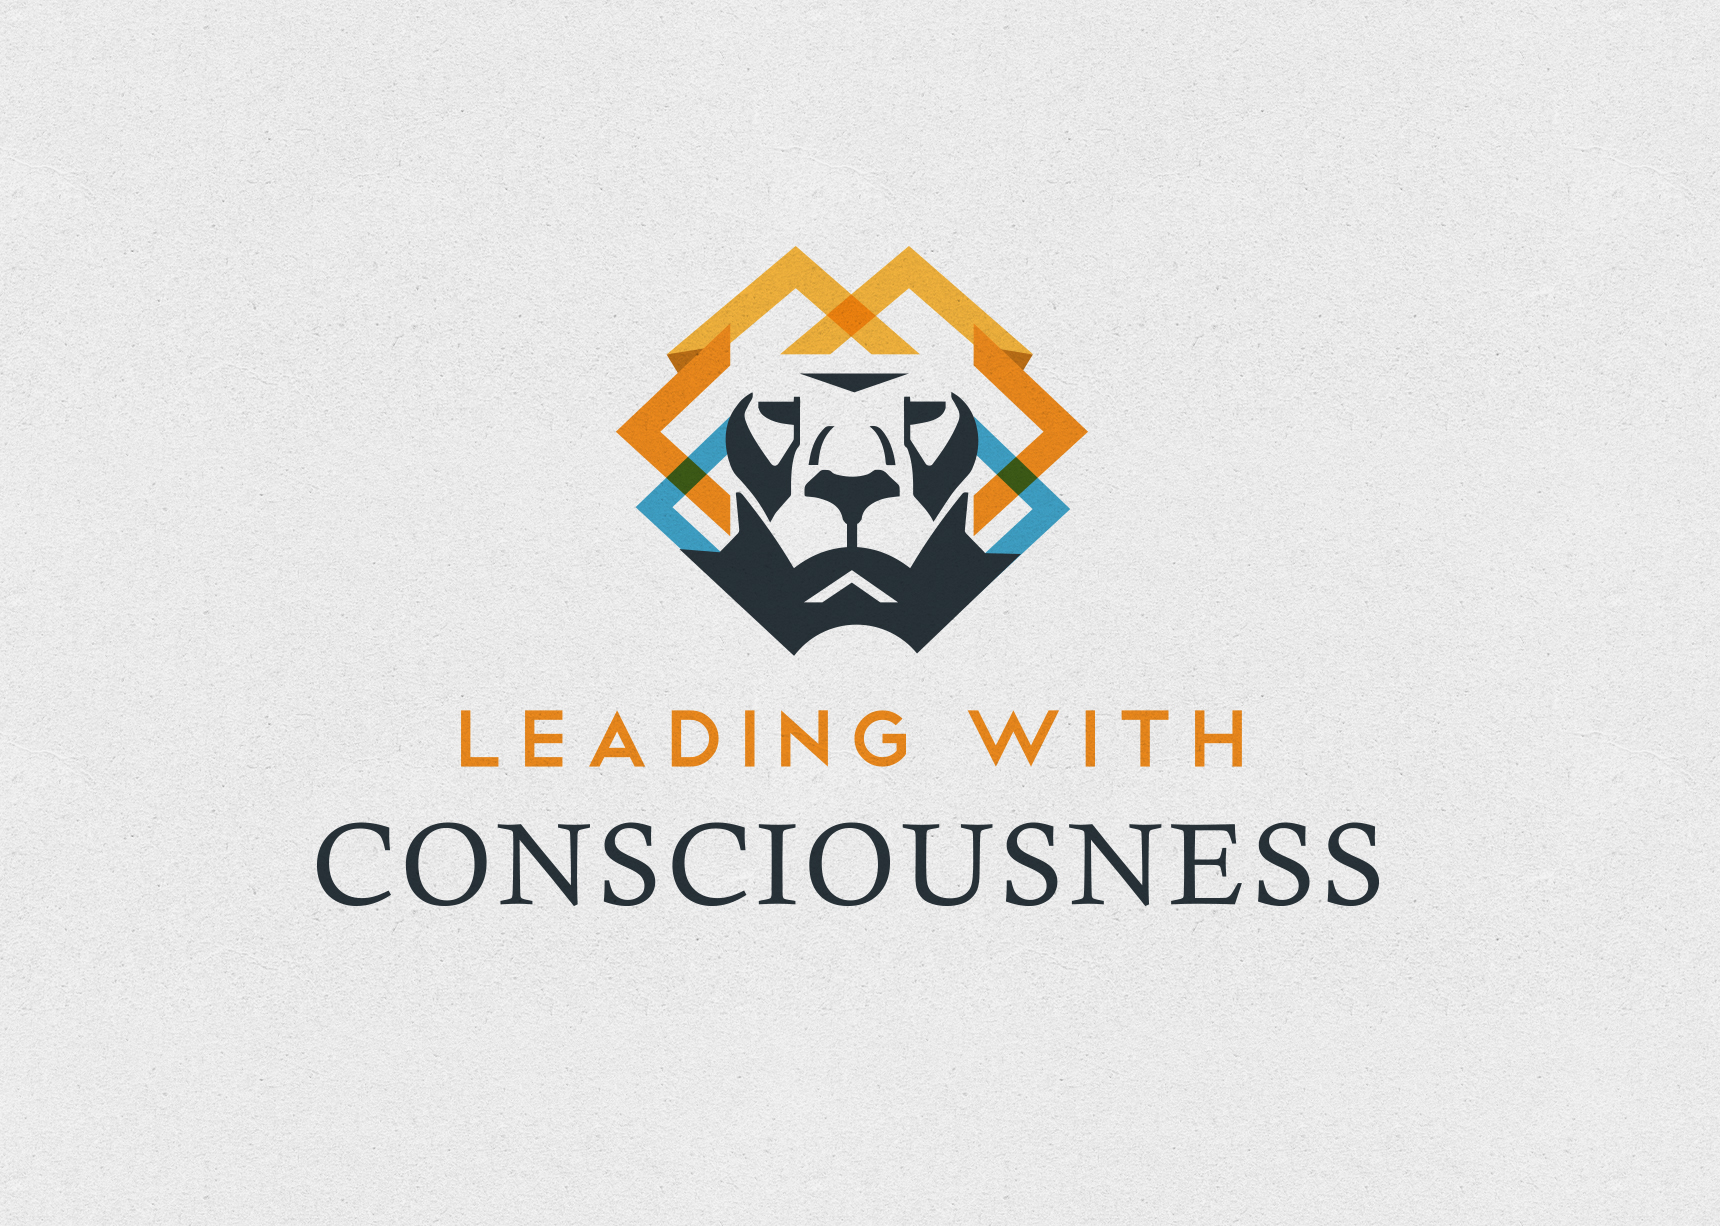 Leading with consciousness logo